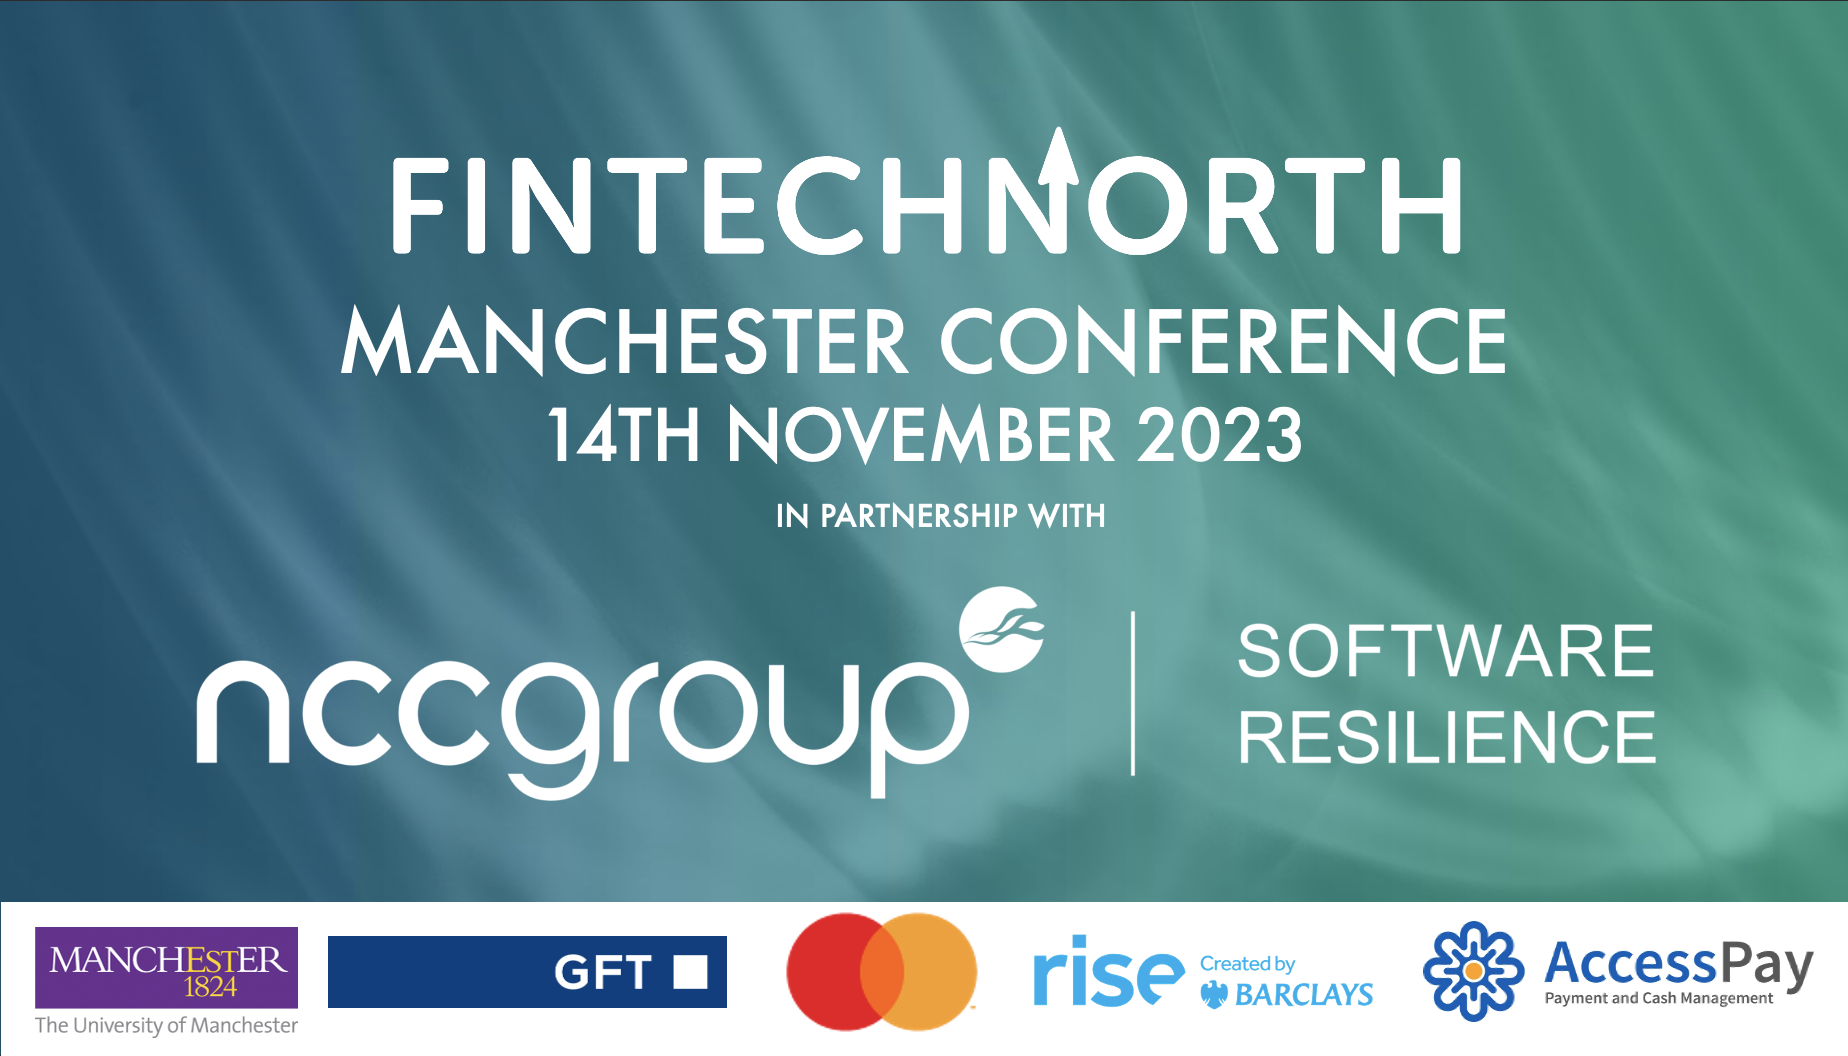 FinTech North returns to Manchester to celebrate the city’s thriving FinTech ecosystem